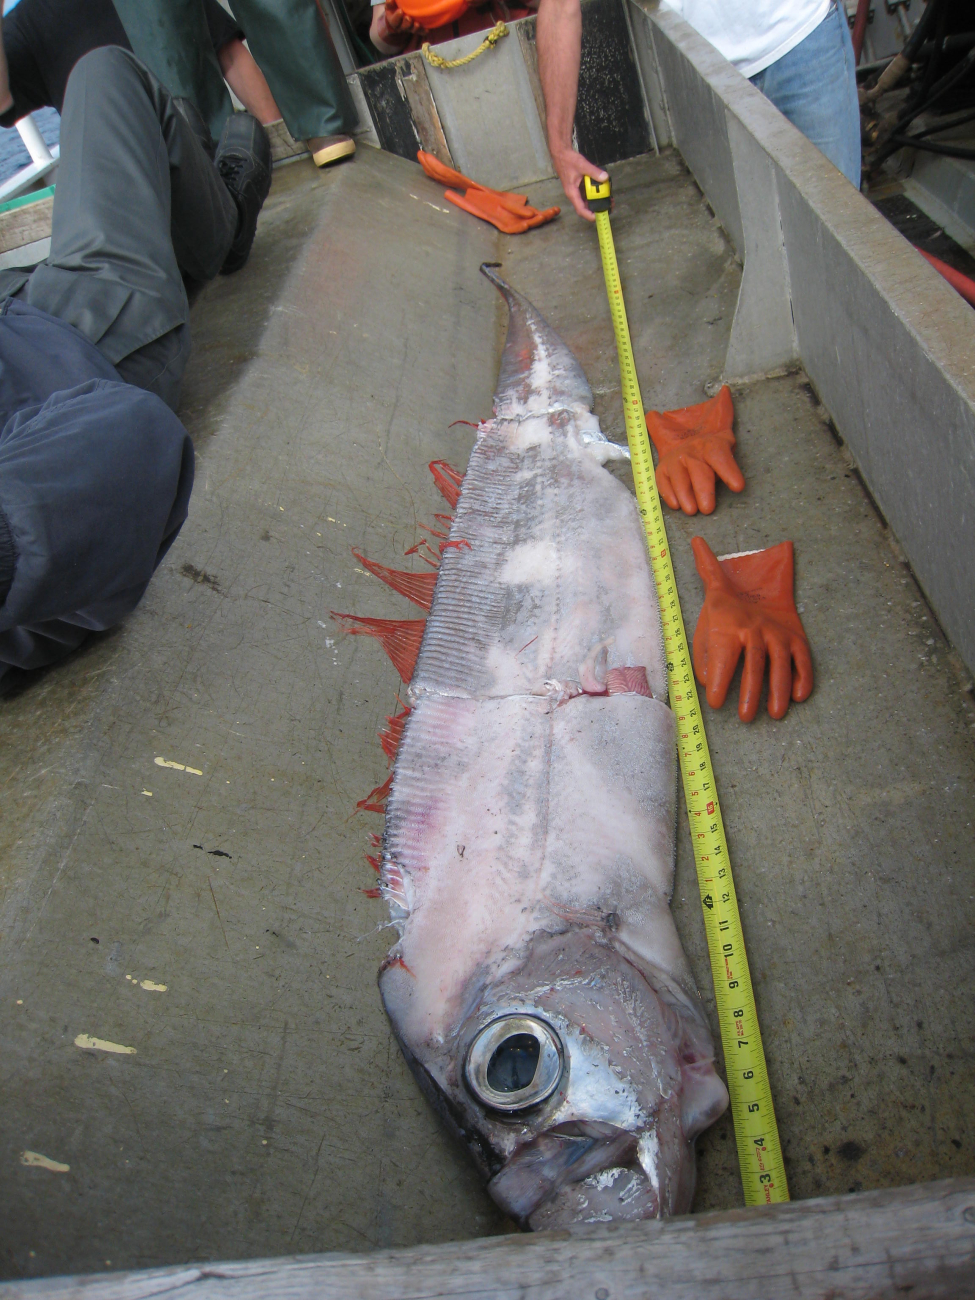 Remains of an oarfish